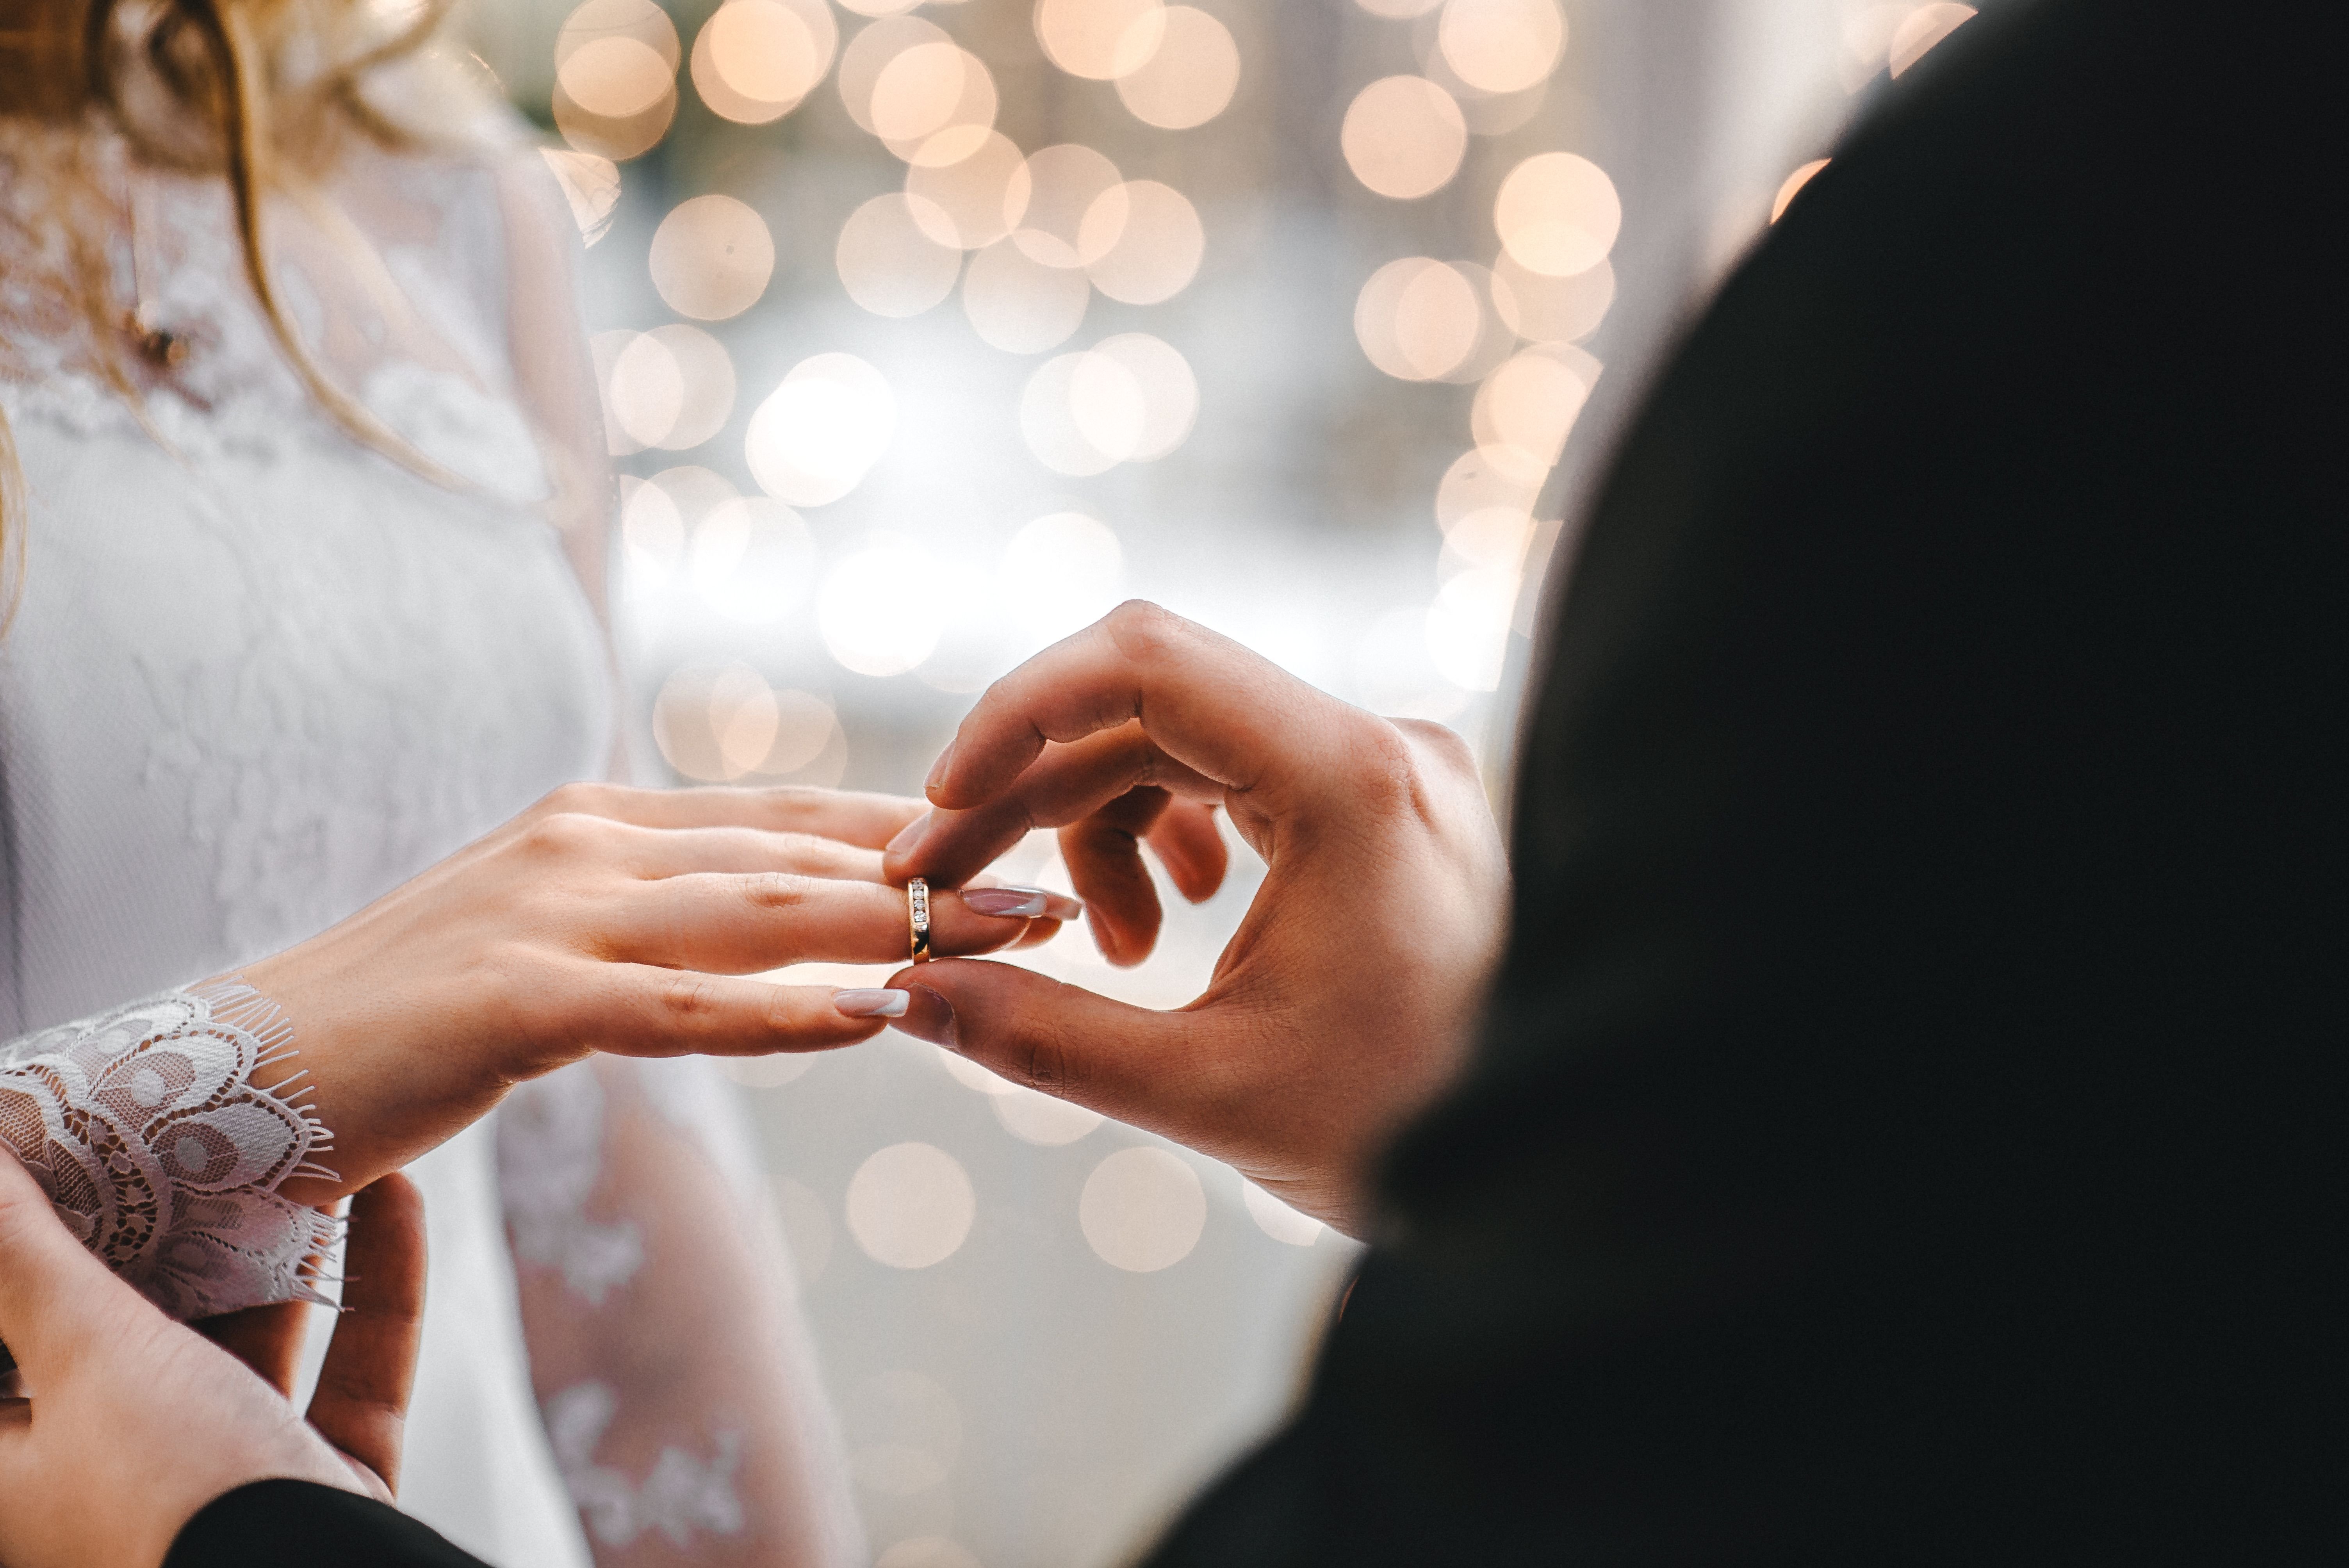 A man places a wedding ring on his bride. | Source: Shutterstock